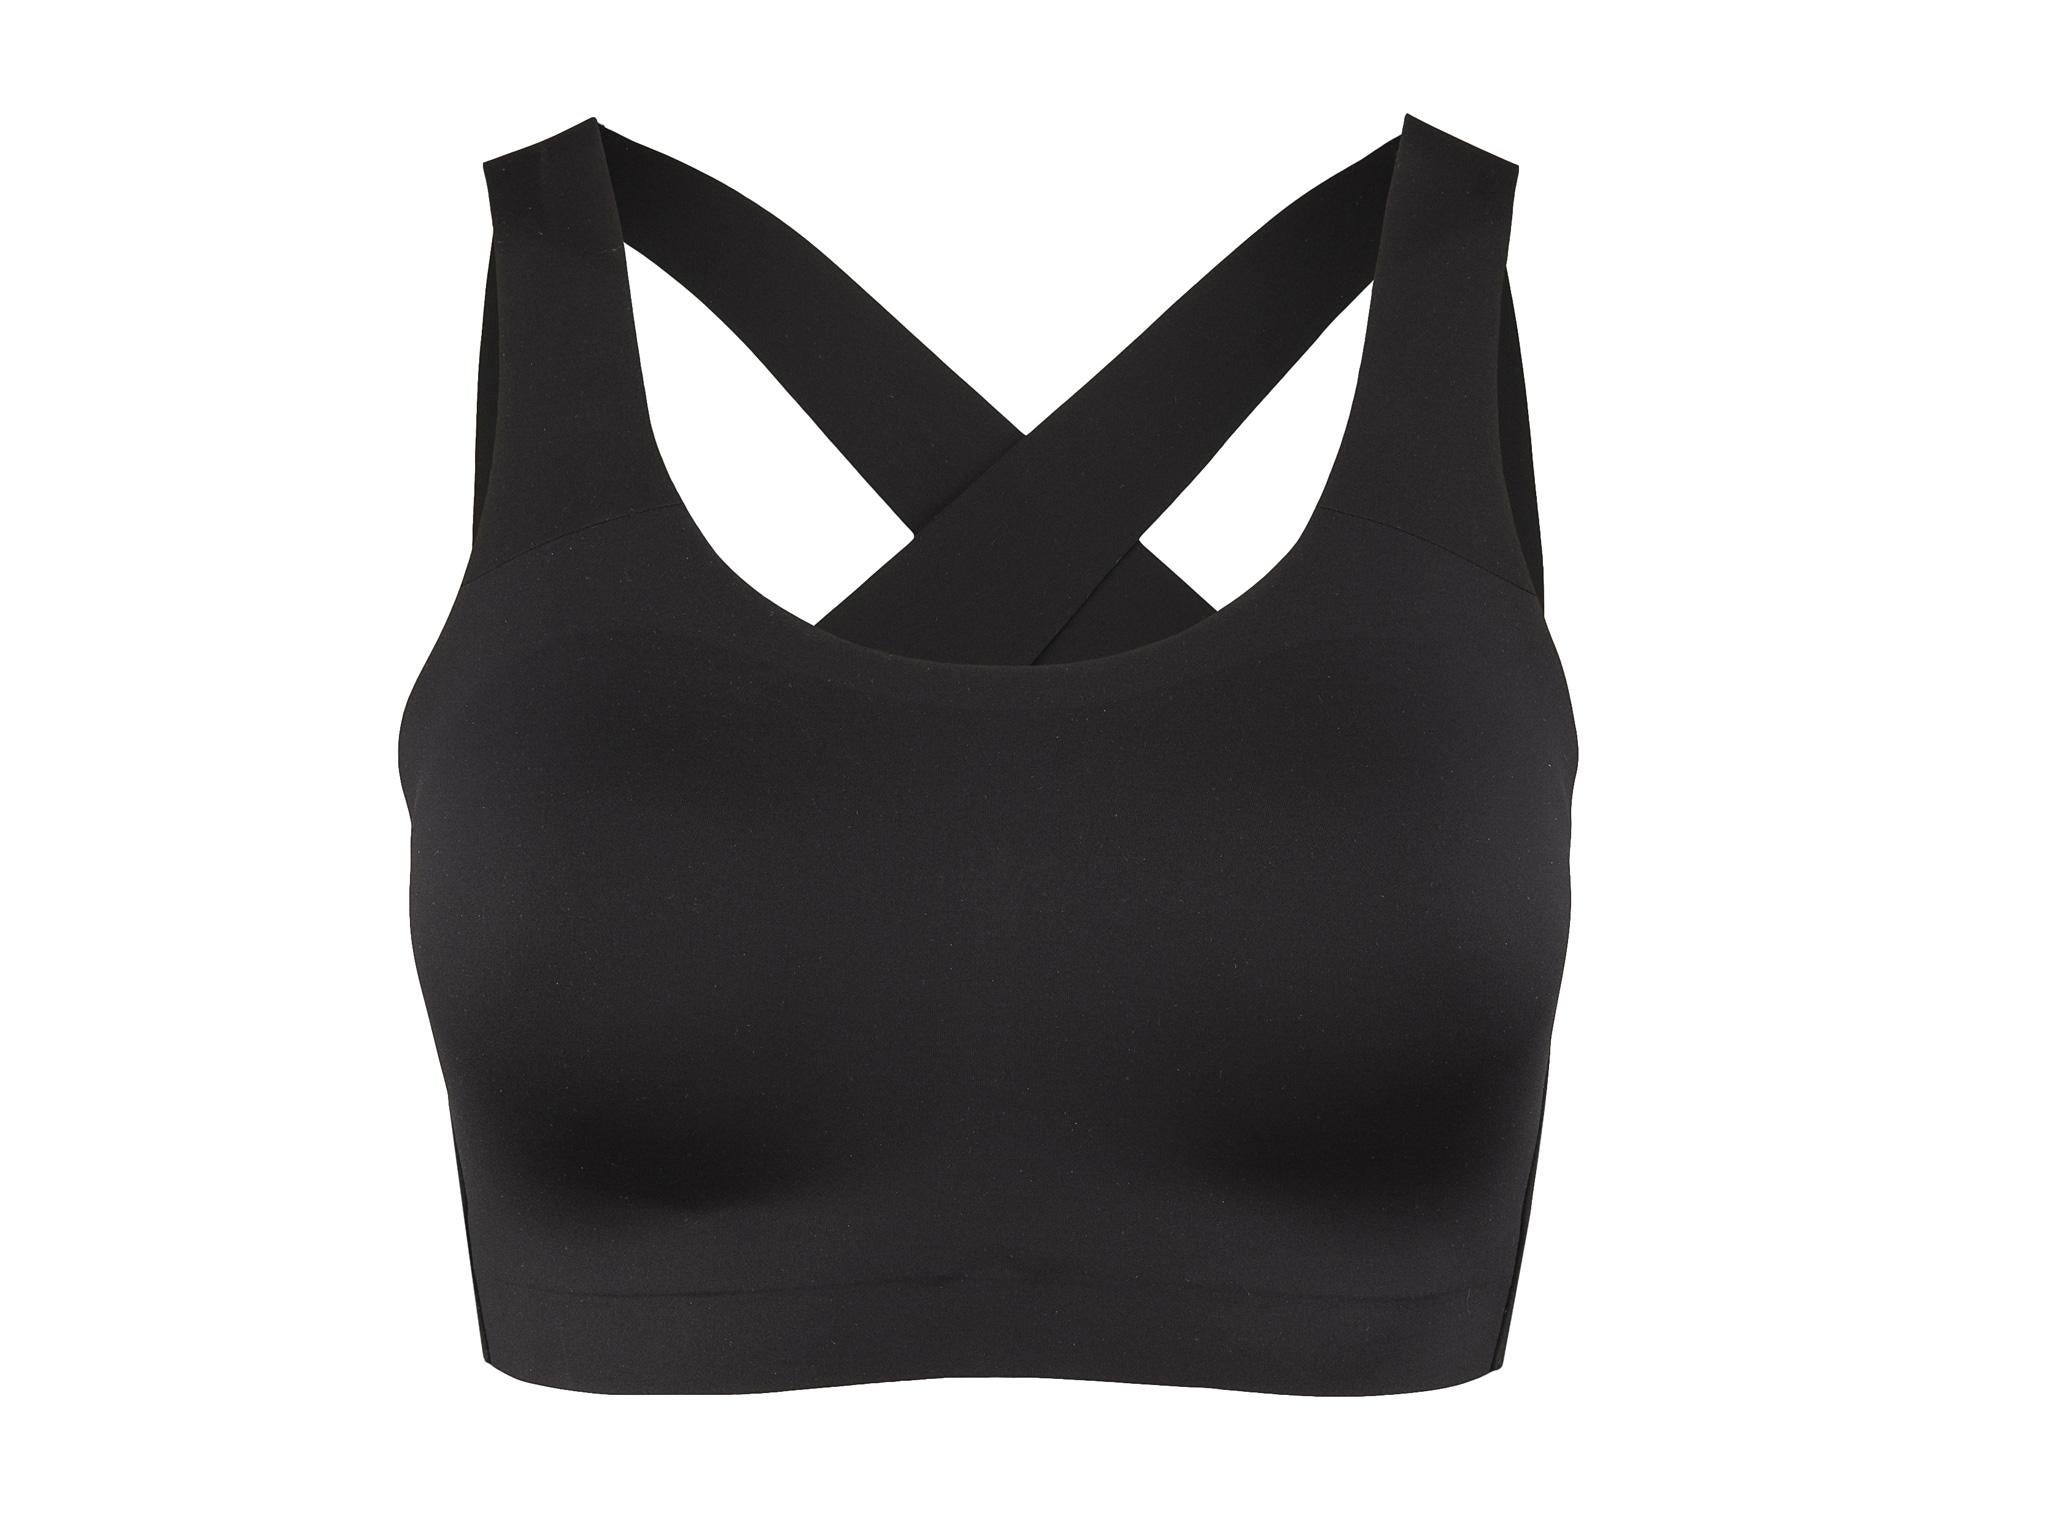 Best sports bras for running – Nautica's Fashion and Beauty